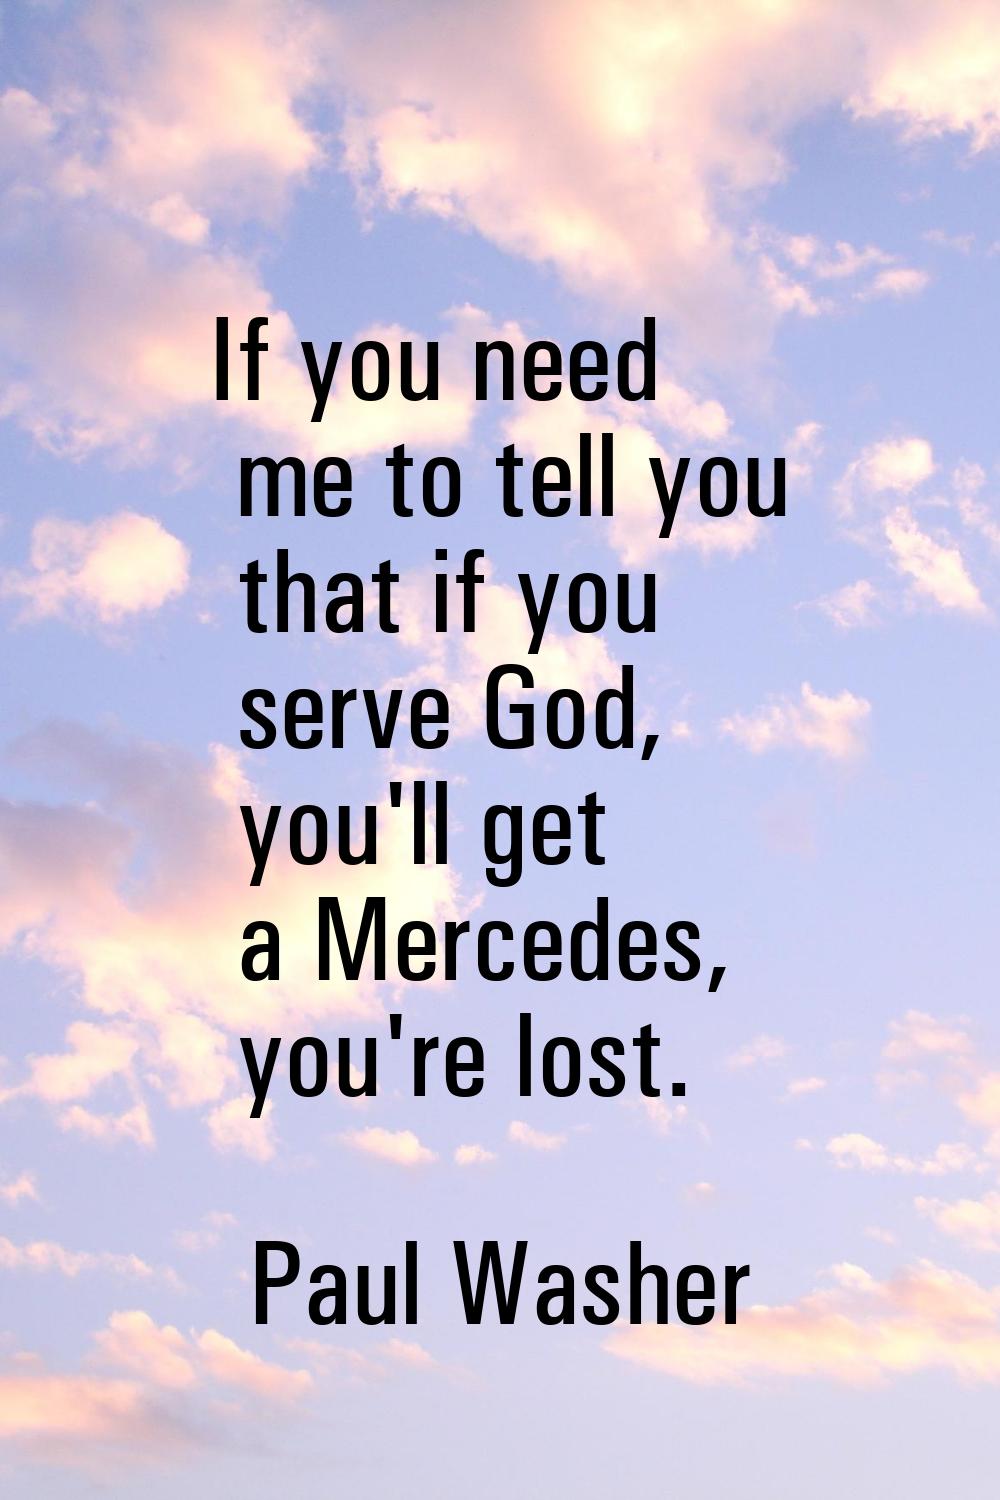 If you need me to tell you that if you serve God, you'll get a Mercedes, you're lost.